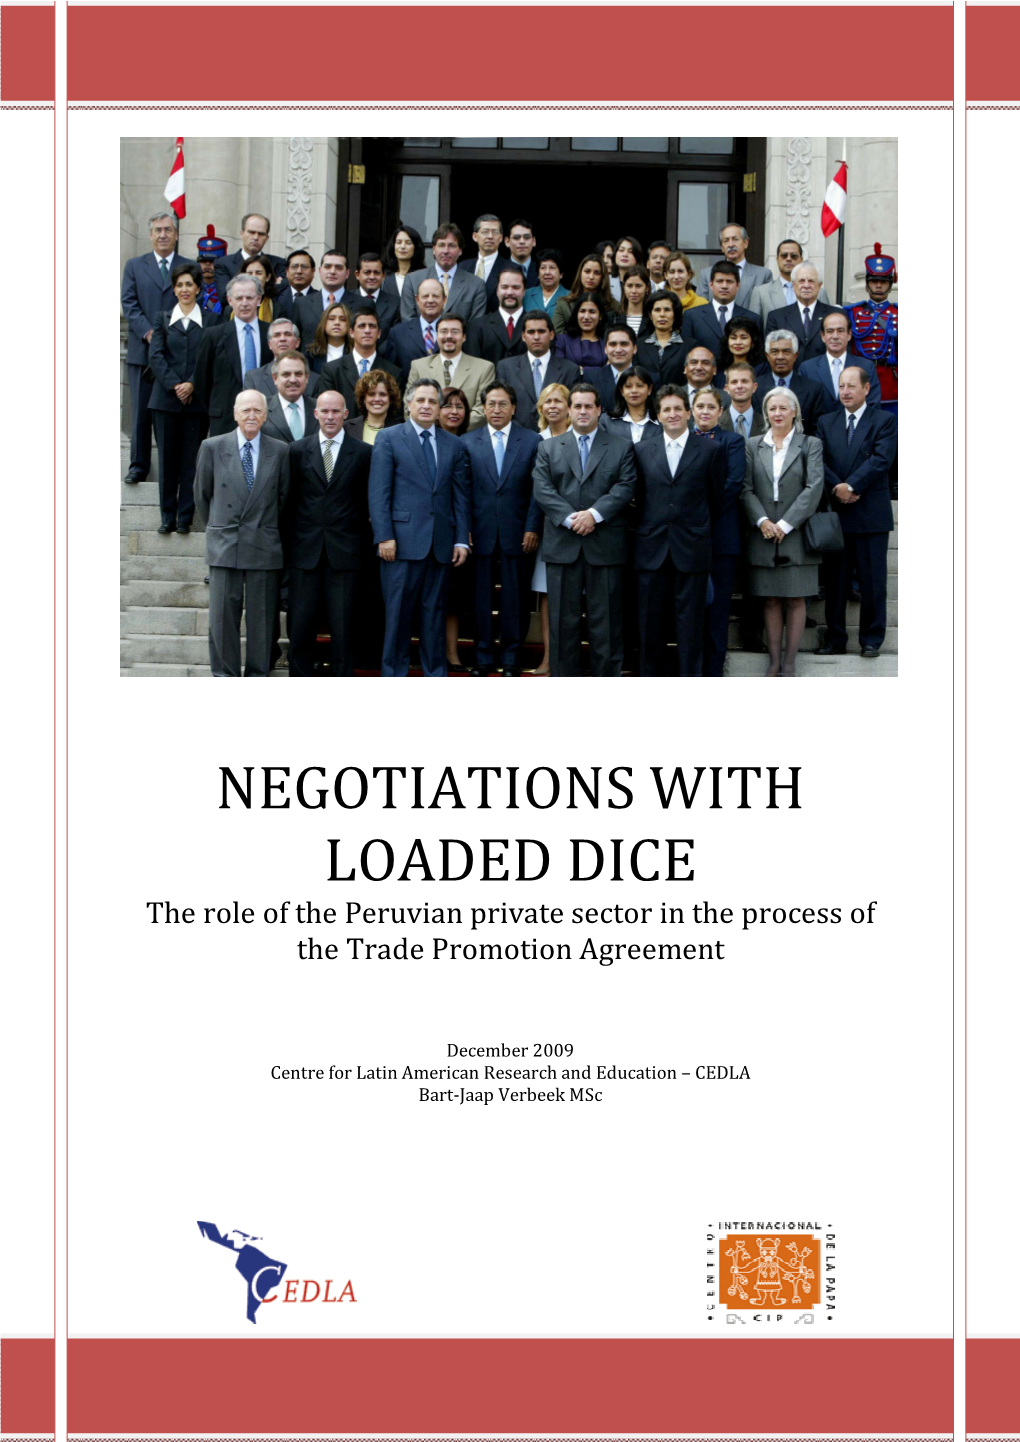 NEGOTIATIONS with LOADED DICE the Role of the Peruvian Private Sector in the Process of the Trade Promotion Agreement